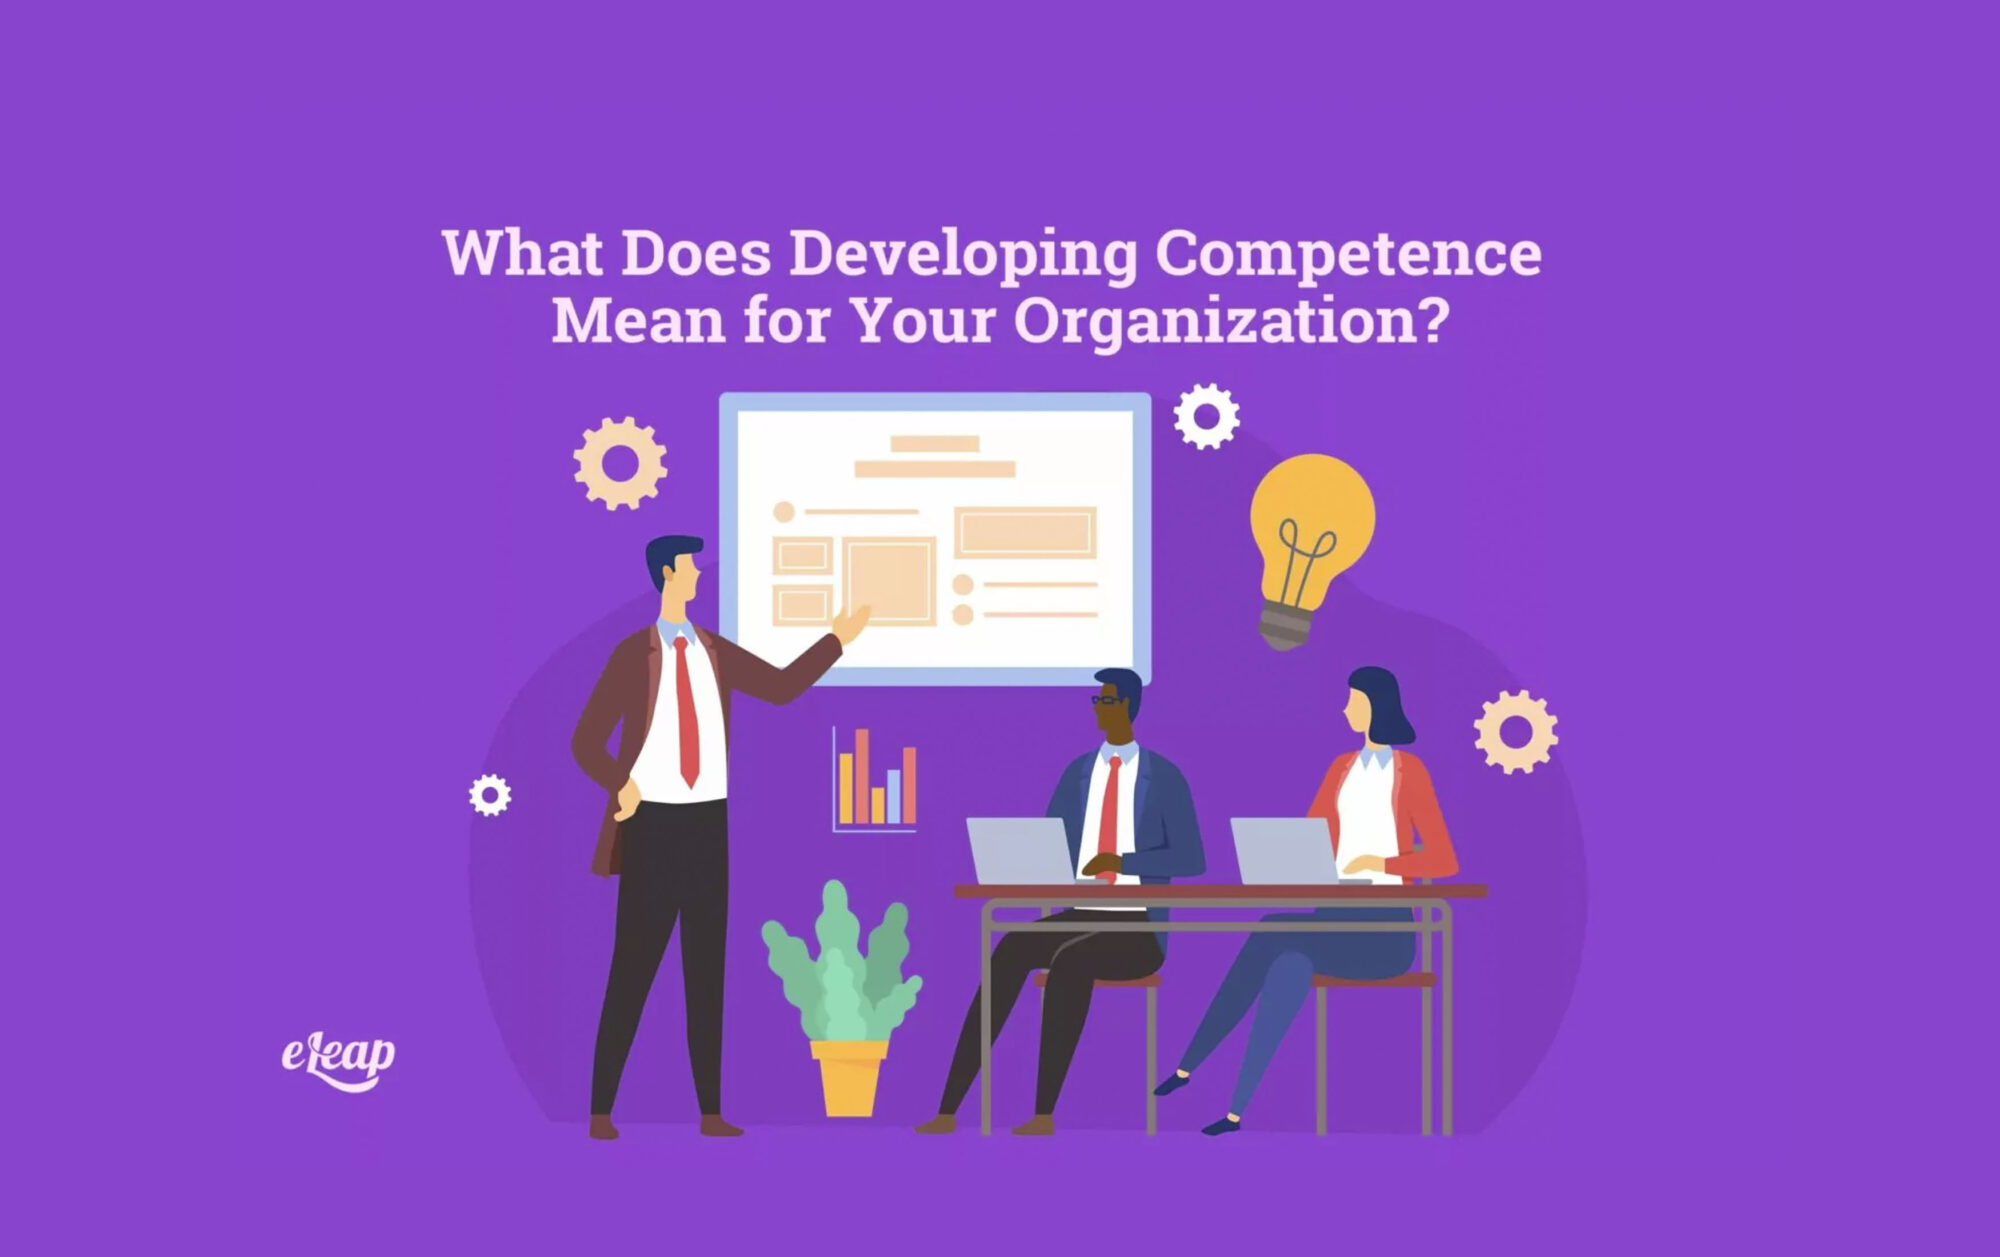 What Does Developing Competence Mean for Your Organization?